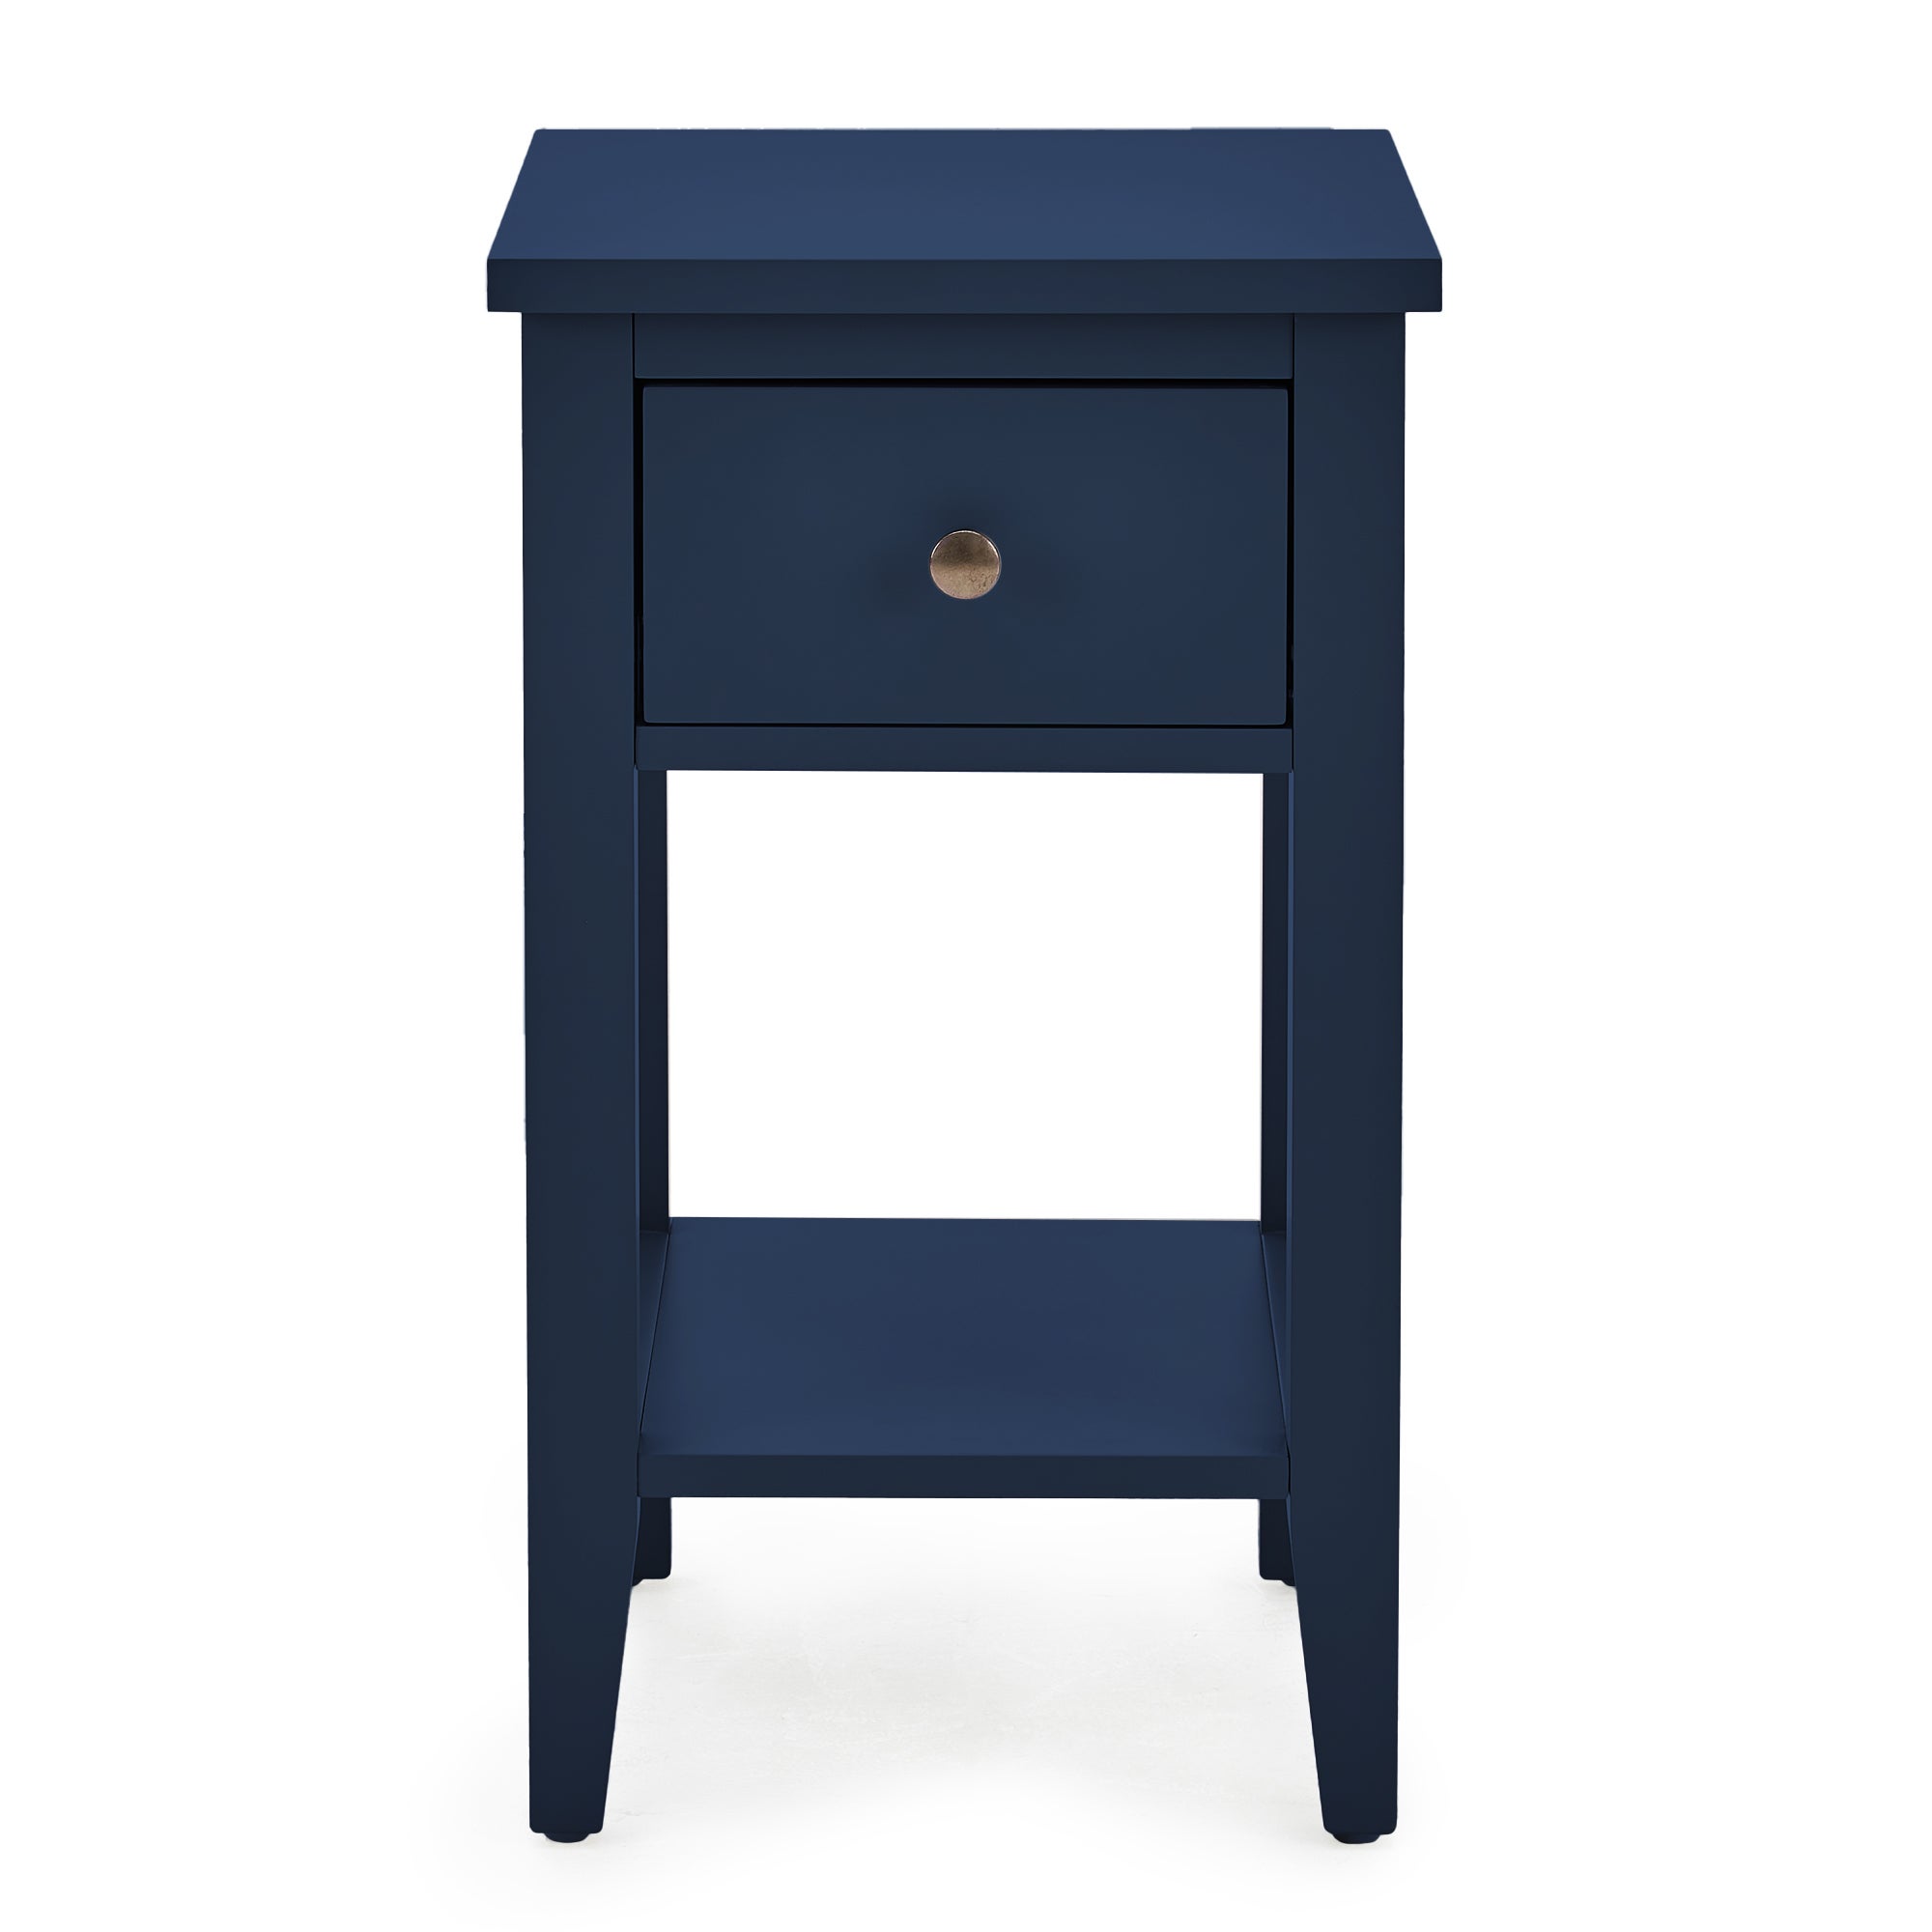 Lynton 1 Drawer Small Bedside Table Navy Blue